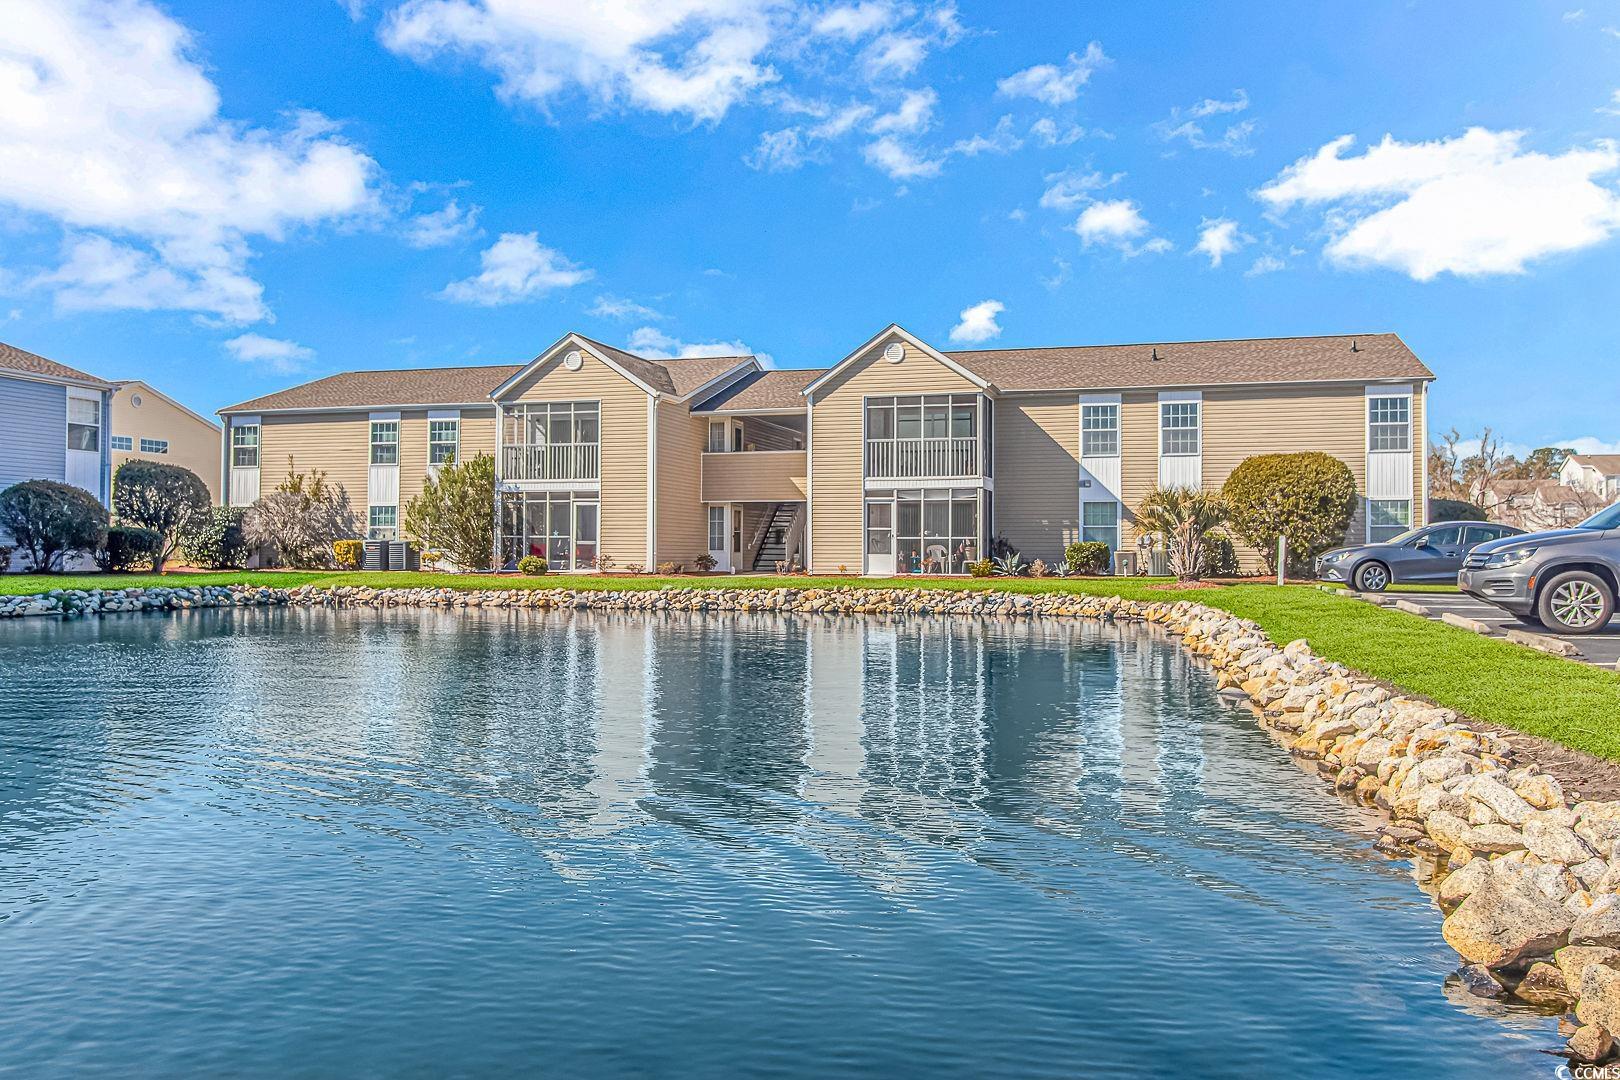 welcome to your own slice of paradise nestled in the heart of south bay lakes, surfside beach, sc! this captivating 3-bedroom, 2-bathroom condo is a haven of comfort and convenience, boasting breathtaking pond views that will leave you in awe. step through the door and immerse yourself in a haven of freshness, with newly painted walls welcoming you into an open-concept oasis. the kitchen, adorned with new counters and exquisite soft close cabinetry, seamlessly blends with the dining area and living space, creating an inviting atmosphere for gatherings and everyday living. the slider in the living room and  windows were replaced in 2017and bathe the rooms in natural light, infusing every corner with warmth and charm. step outside through the sliding glass door onto your very own screened-in balcony, a private sanctuary where you can bask in the serenity of nature and unwind amidst the tranquil sights and sounds of the surrounding landscape. retreat to the primary suite, where spacious proportions with closets that provide ample storage for your personal belongings. indulge in the ensuite bathroom, featuring a tub/shower combo, vanity, and a transom window that floods the space with soothing natural light, creating an atmosphere of pure relaxation. two additional guest rooms offer versatility, perfect for accommodating overnight visitors or crafting your ideal home office space. with easy access to the guest bathroom - updated in 2020, your guests will feel right at home. south bay lakes has outdoor community pools, a community observation deck on the large pond by the community clubhouse, and nature paths. nestled between hwy 17 business and hwy 17 bypass, this property offers convenience to the beach, all shopping, fun local eateries, the murrells inlet marshwalk, and attractions. don't miss out on this incredible opportunity to own a piece of paradise in one of the most sought-after communities along the south carolina coast. schedule your showing today and start living the coastal lifestyle you've always dreamed of! all measurements are not guaranteed and are the buyer's responsibility to verify.